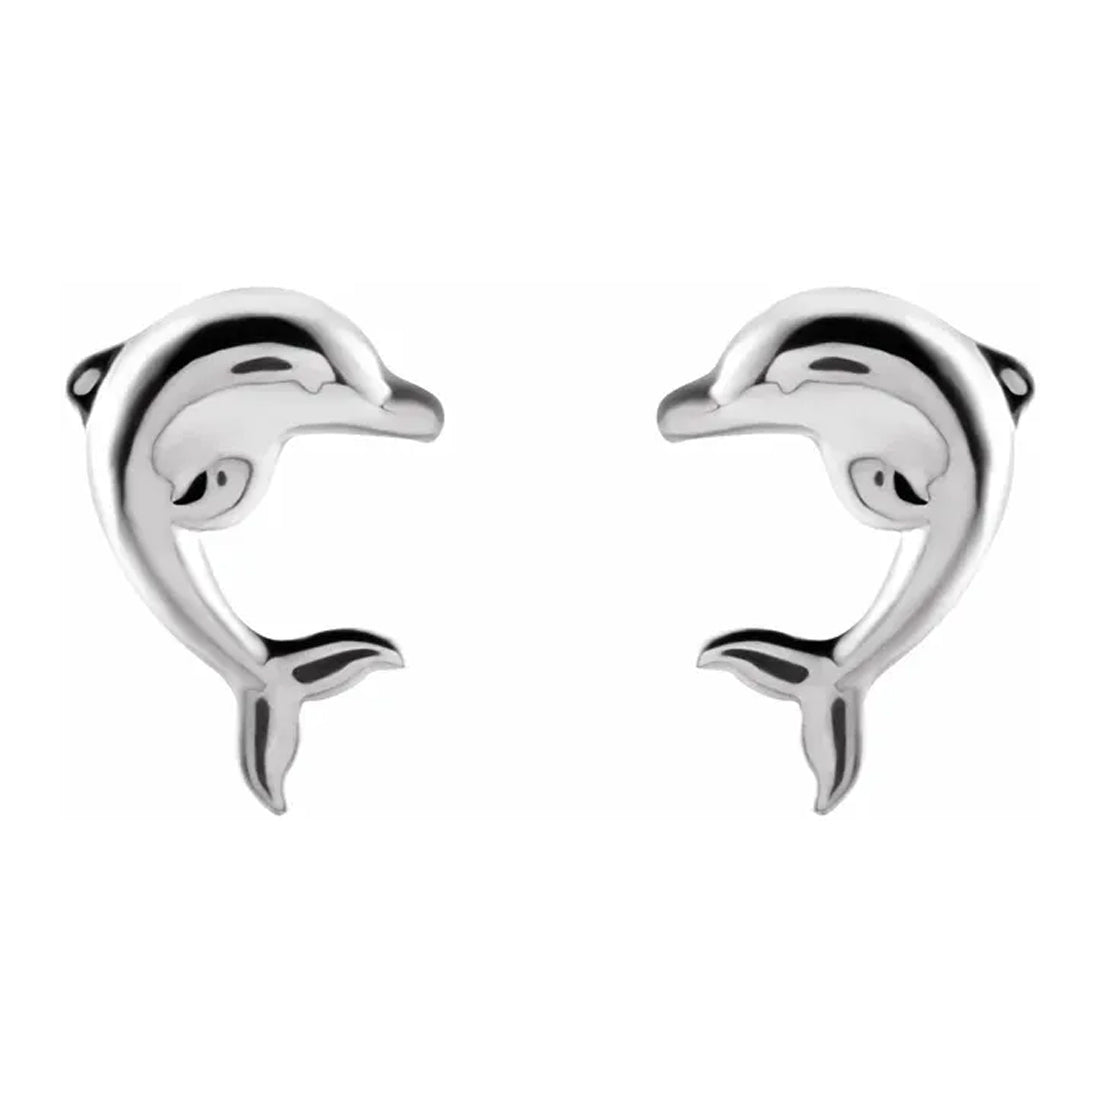 Ladies 14K Yellow, White or Rose Gold Dolphin Stud Earrings, 9.1x6.4mm - US Jewels